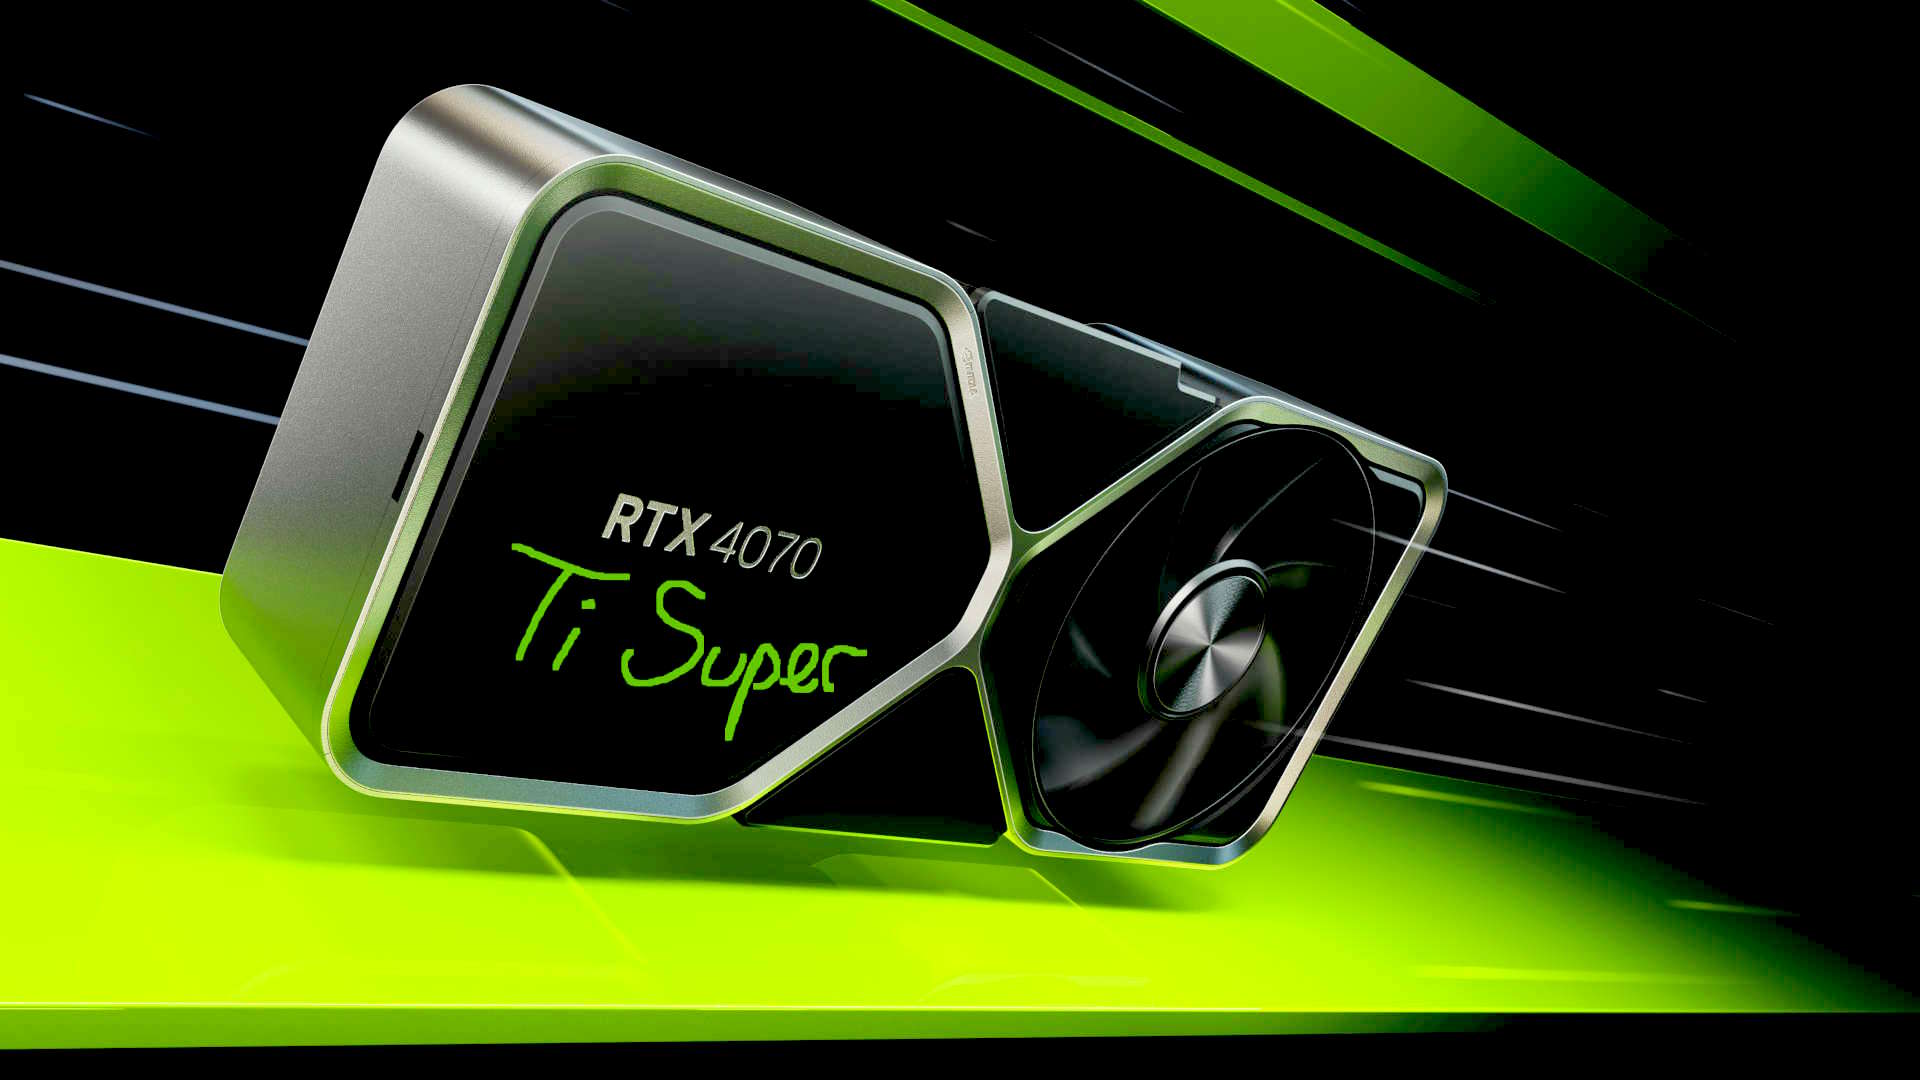 Packaging leak suggests the most ridiculous Nvidia GPU name is actually happening